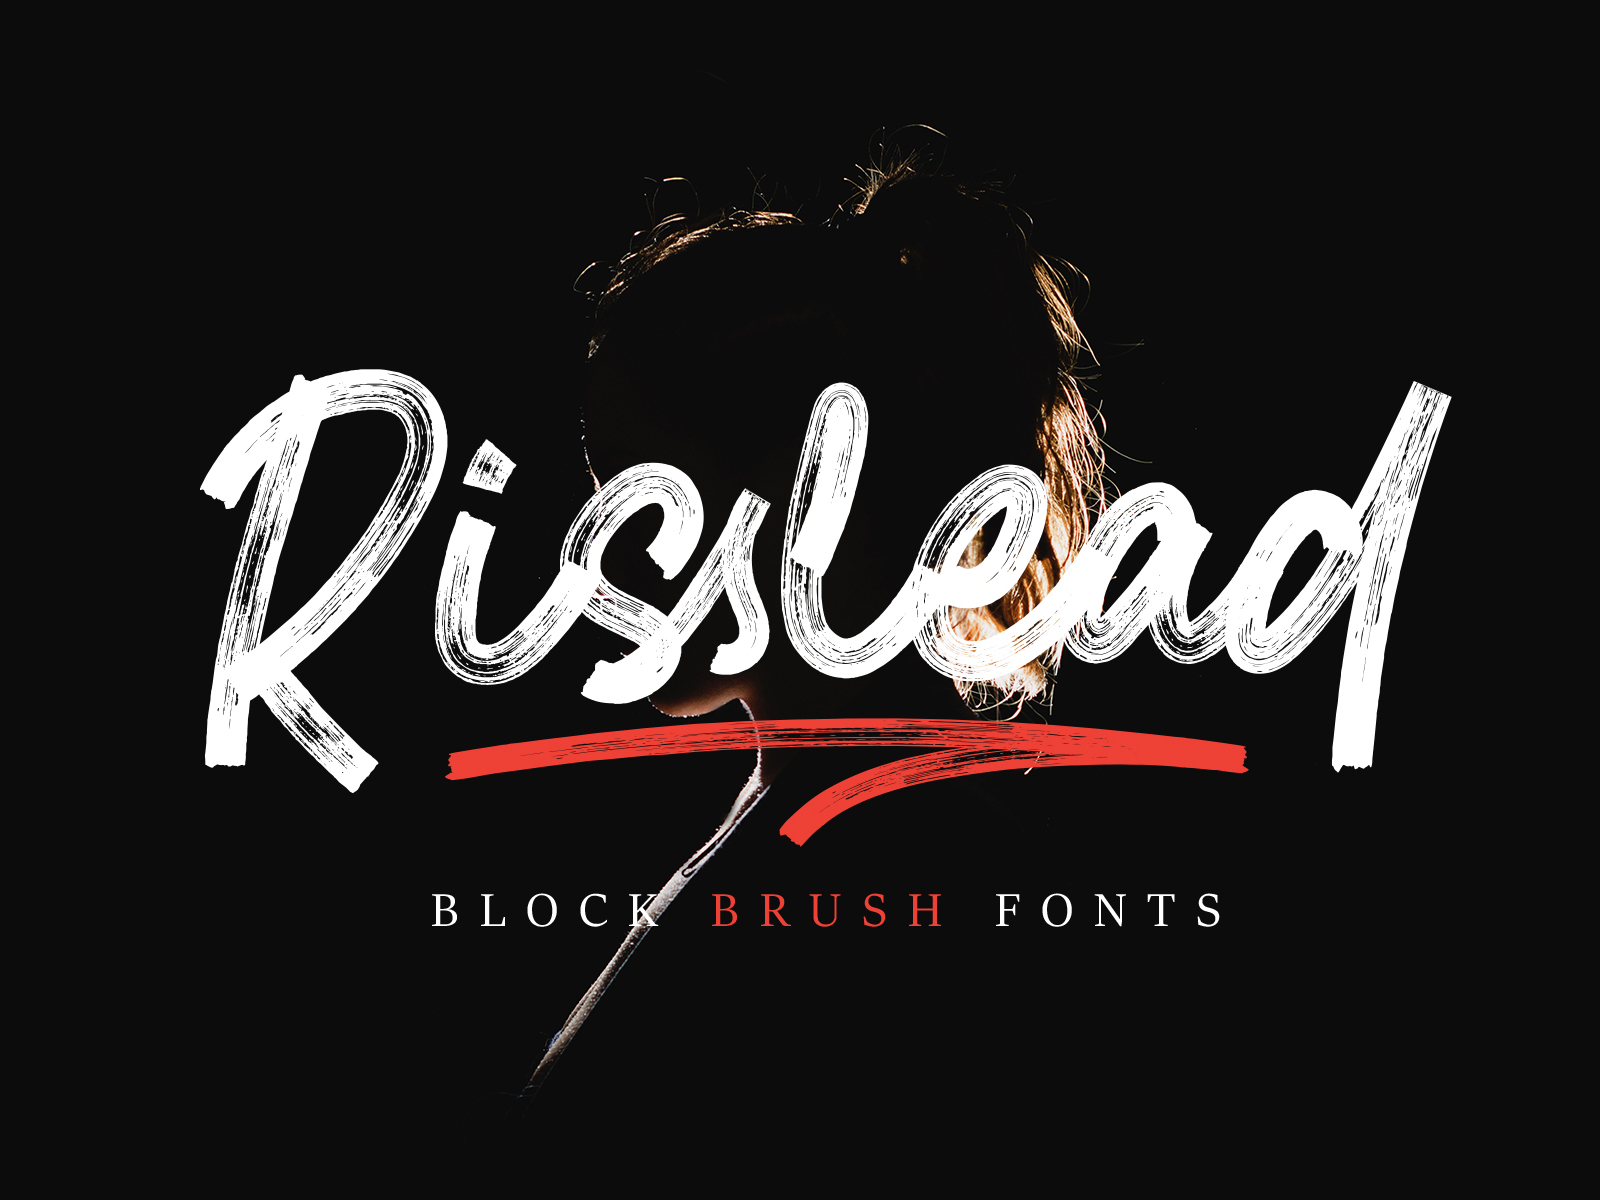 Download Free Risslead Block Brush Fonts By Stefie Justprince On Dribbble Fonts Typography